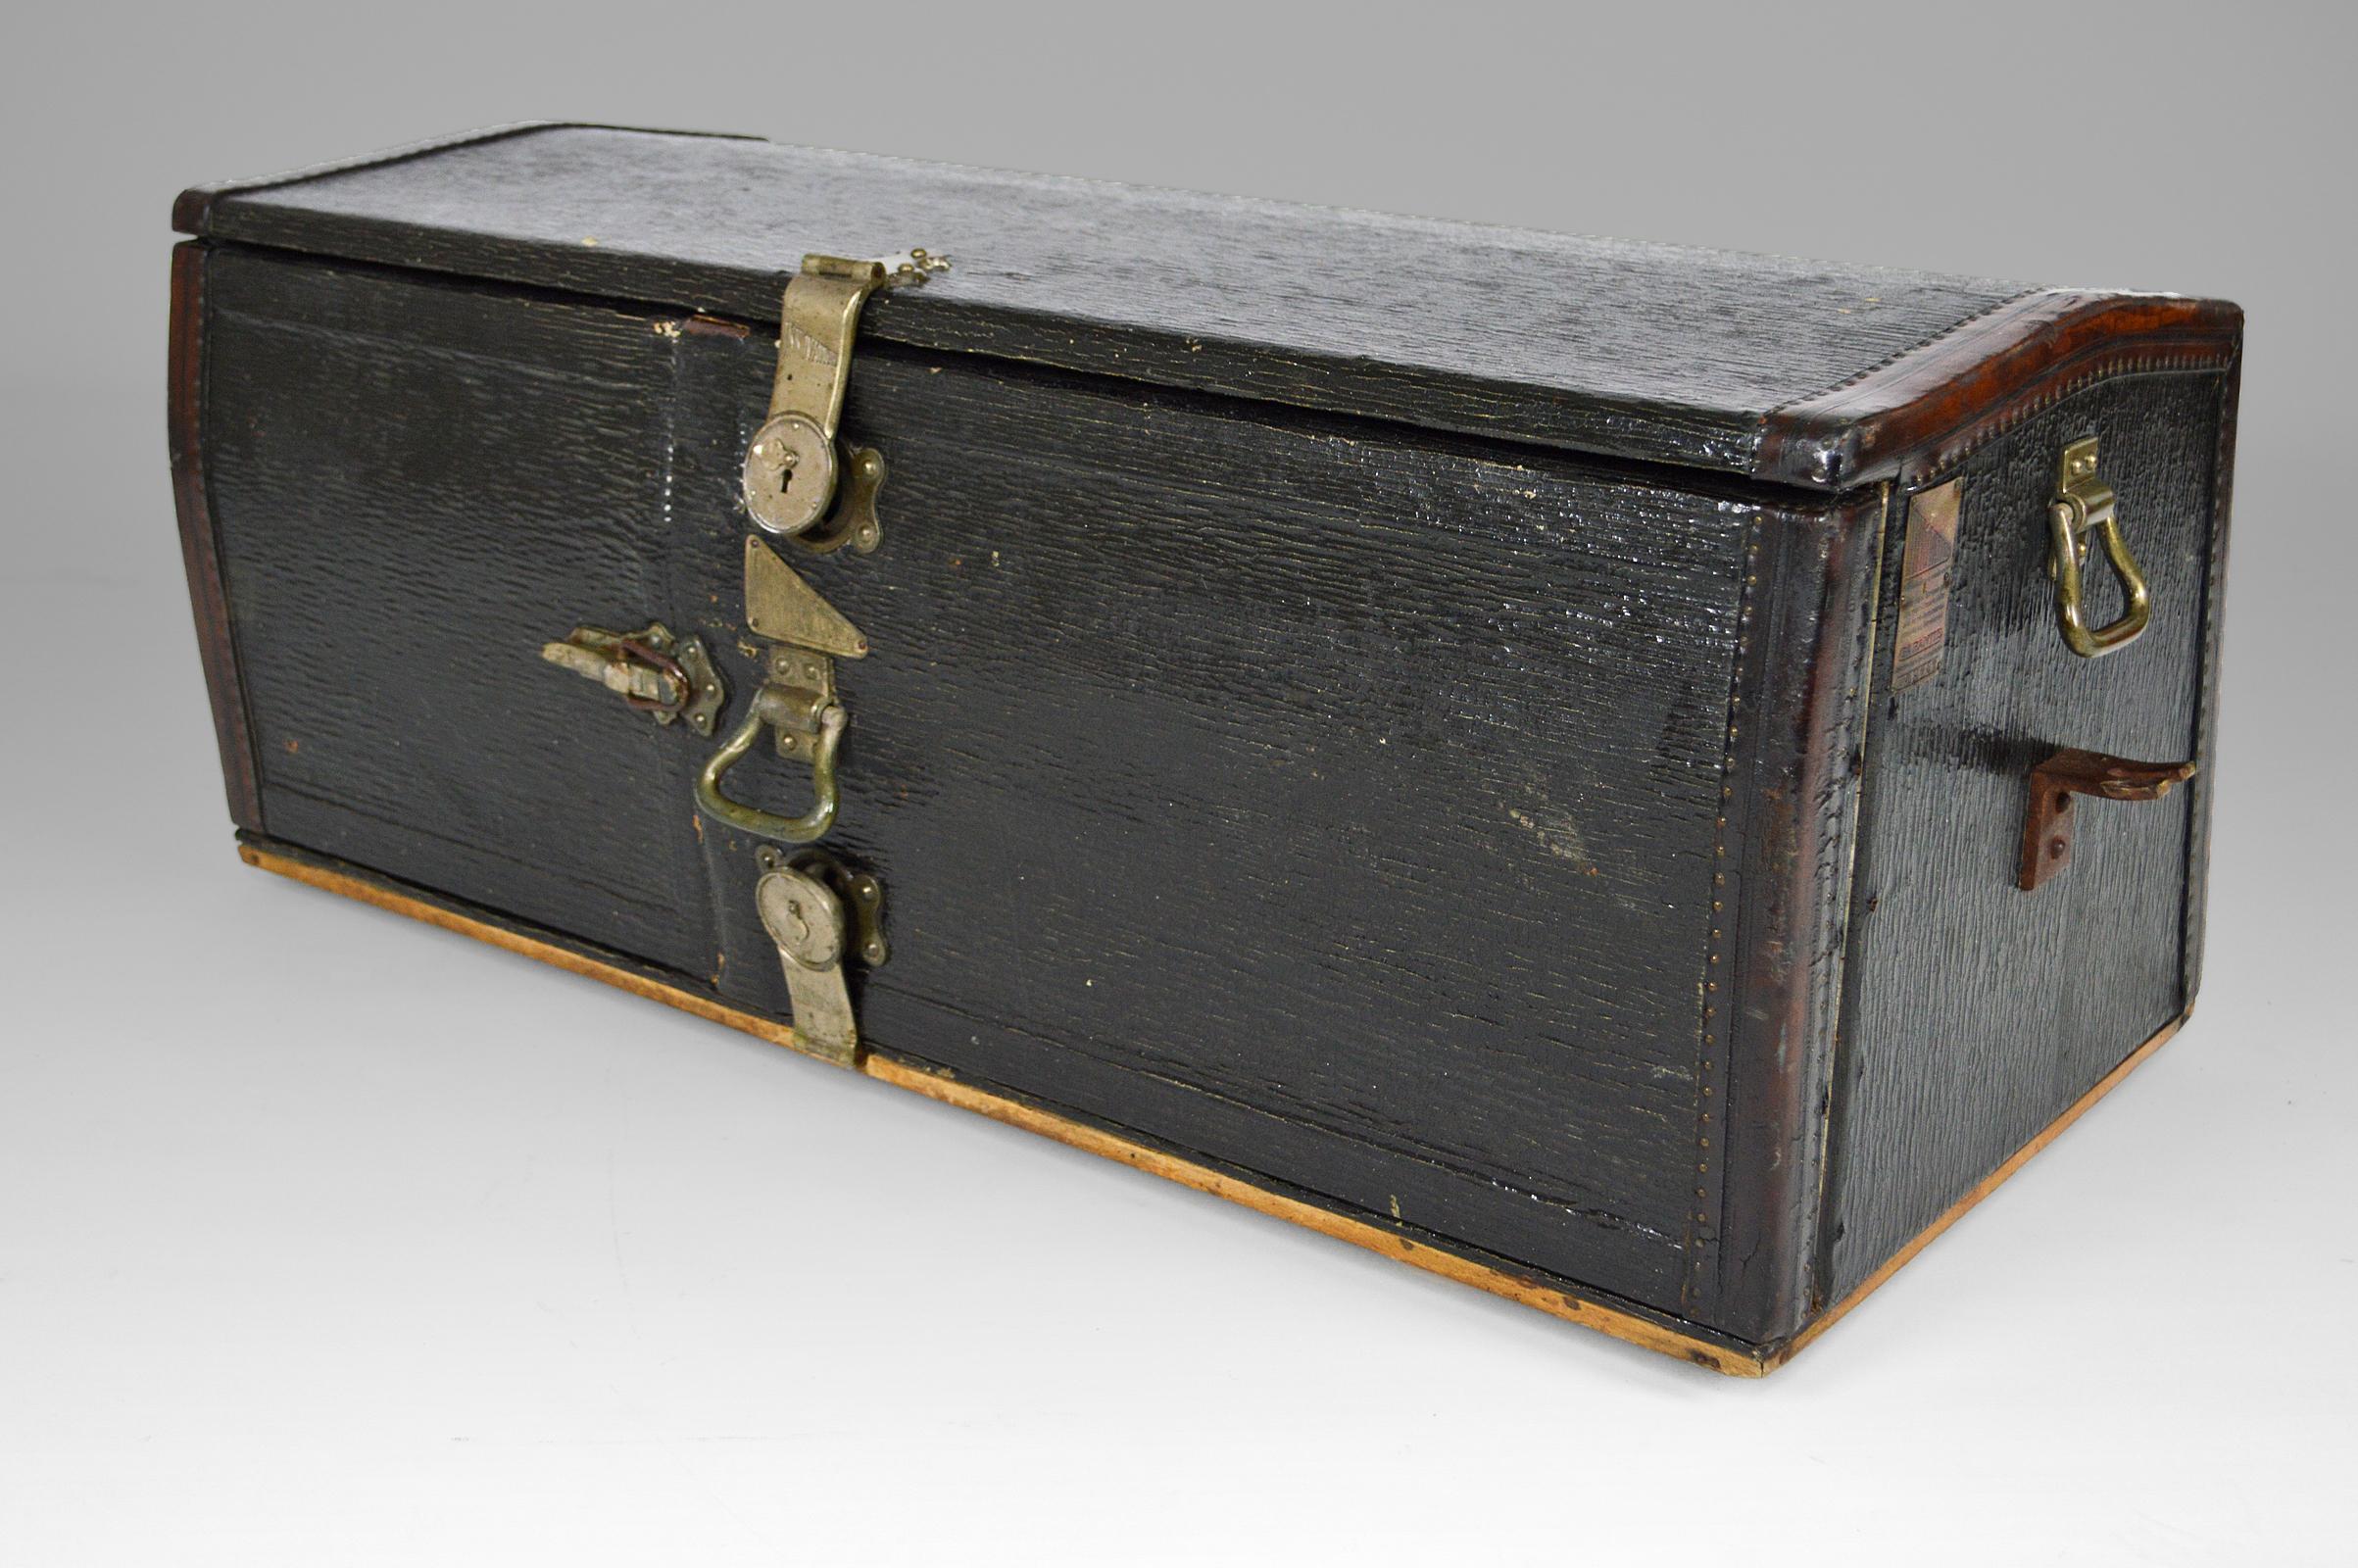 Original automobile trunk from the 1920s covered with black coated canvas.

Has a shelf inside.
Can be used as various storage furniture according to tastes and needs (shoes, aperitif glasses...).

Art Deco / Industrial style, France, circa